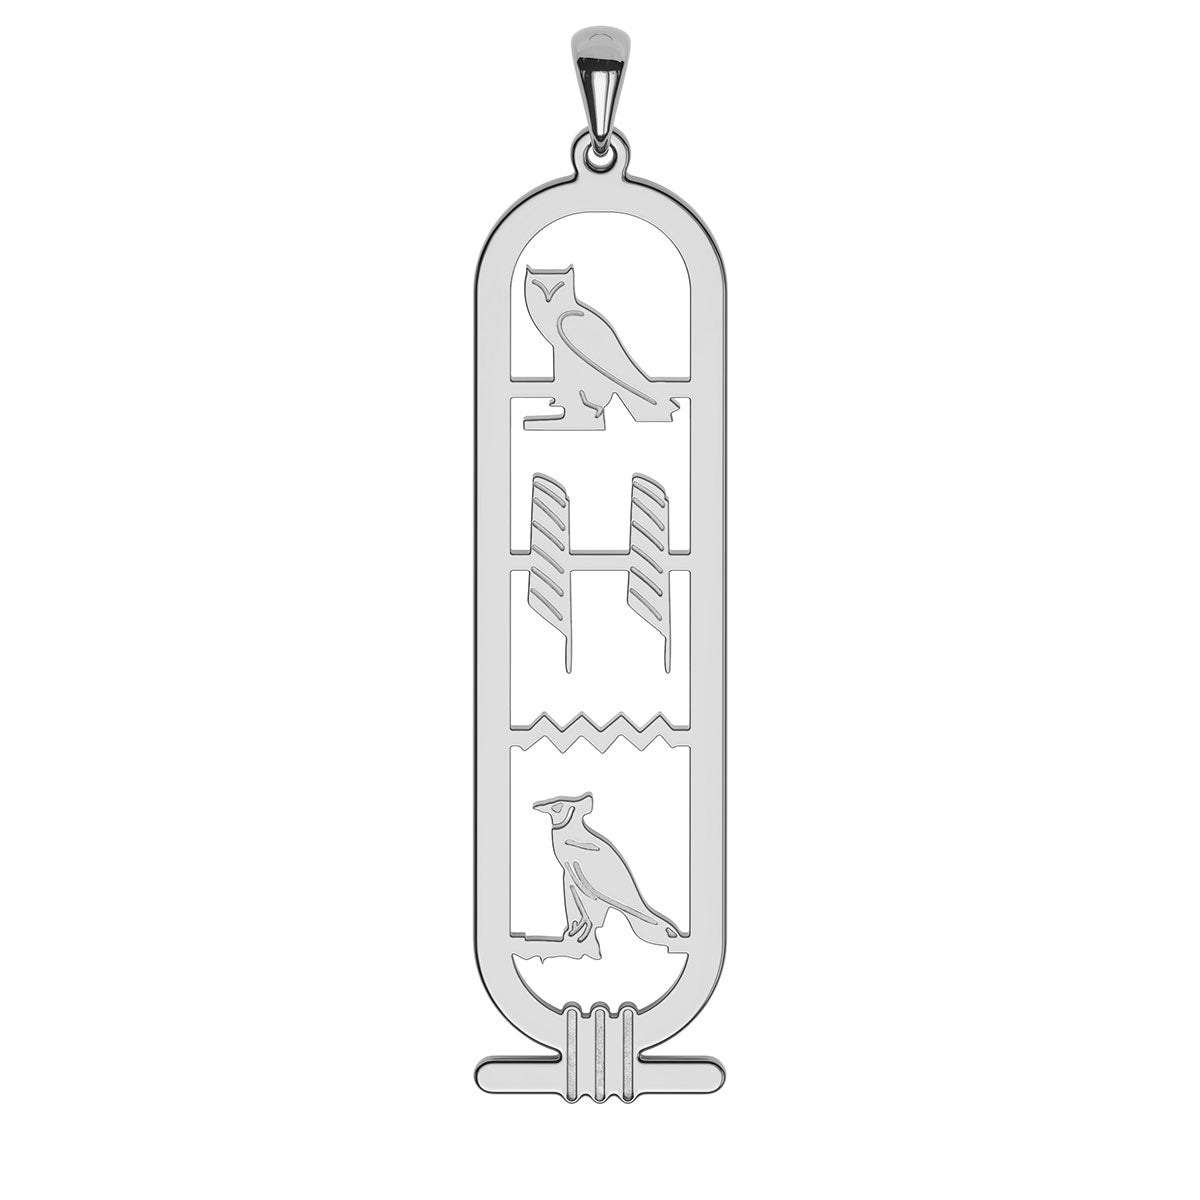 Cut-out Personalized Cartouche Egyptian Hieroglyph Name Necklace